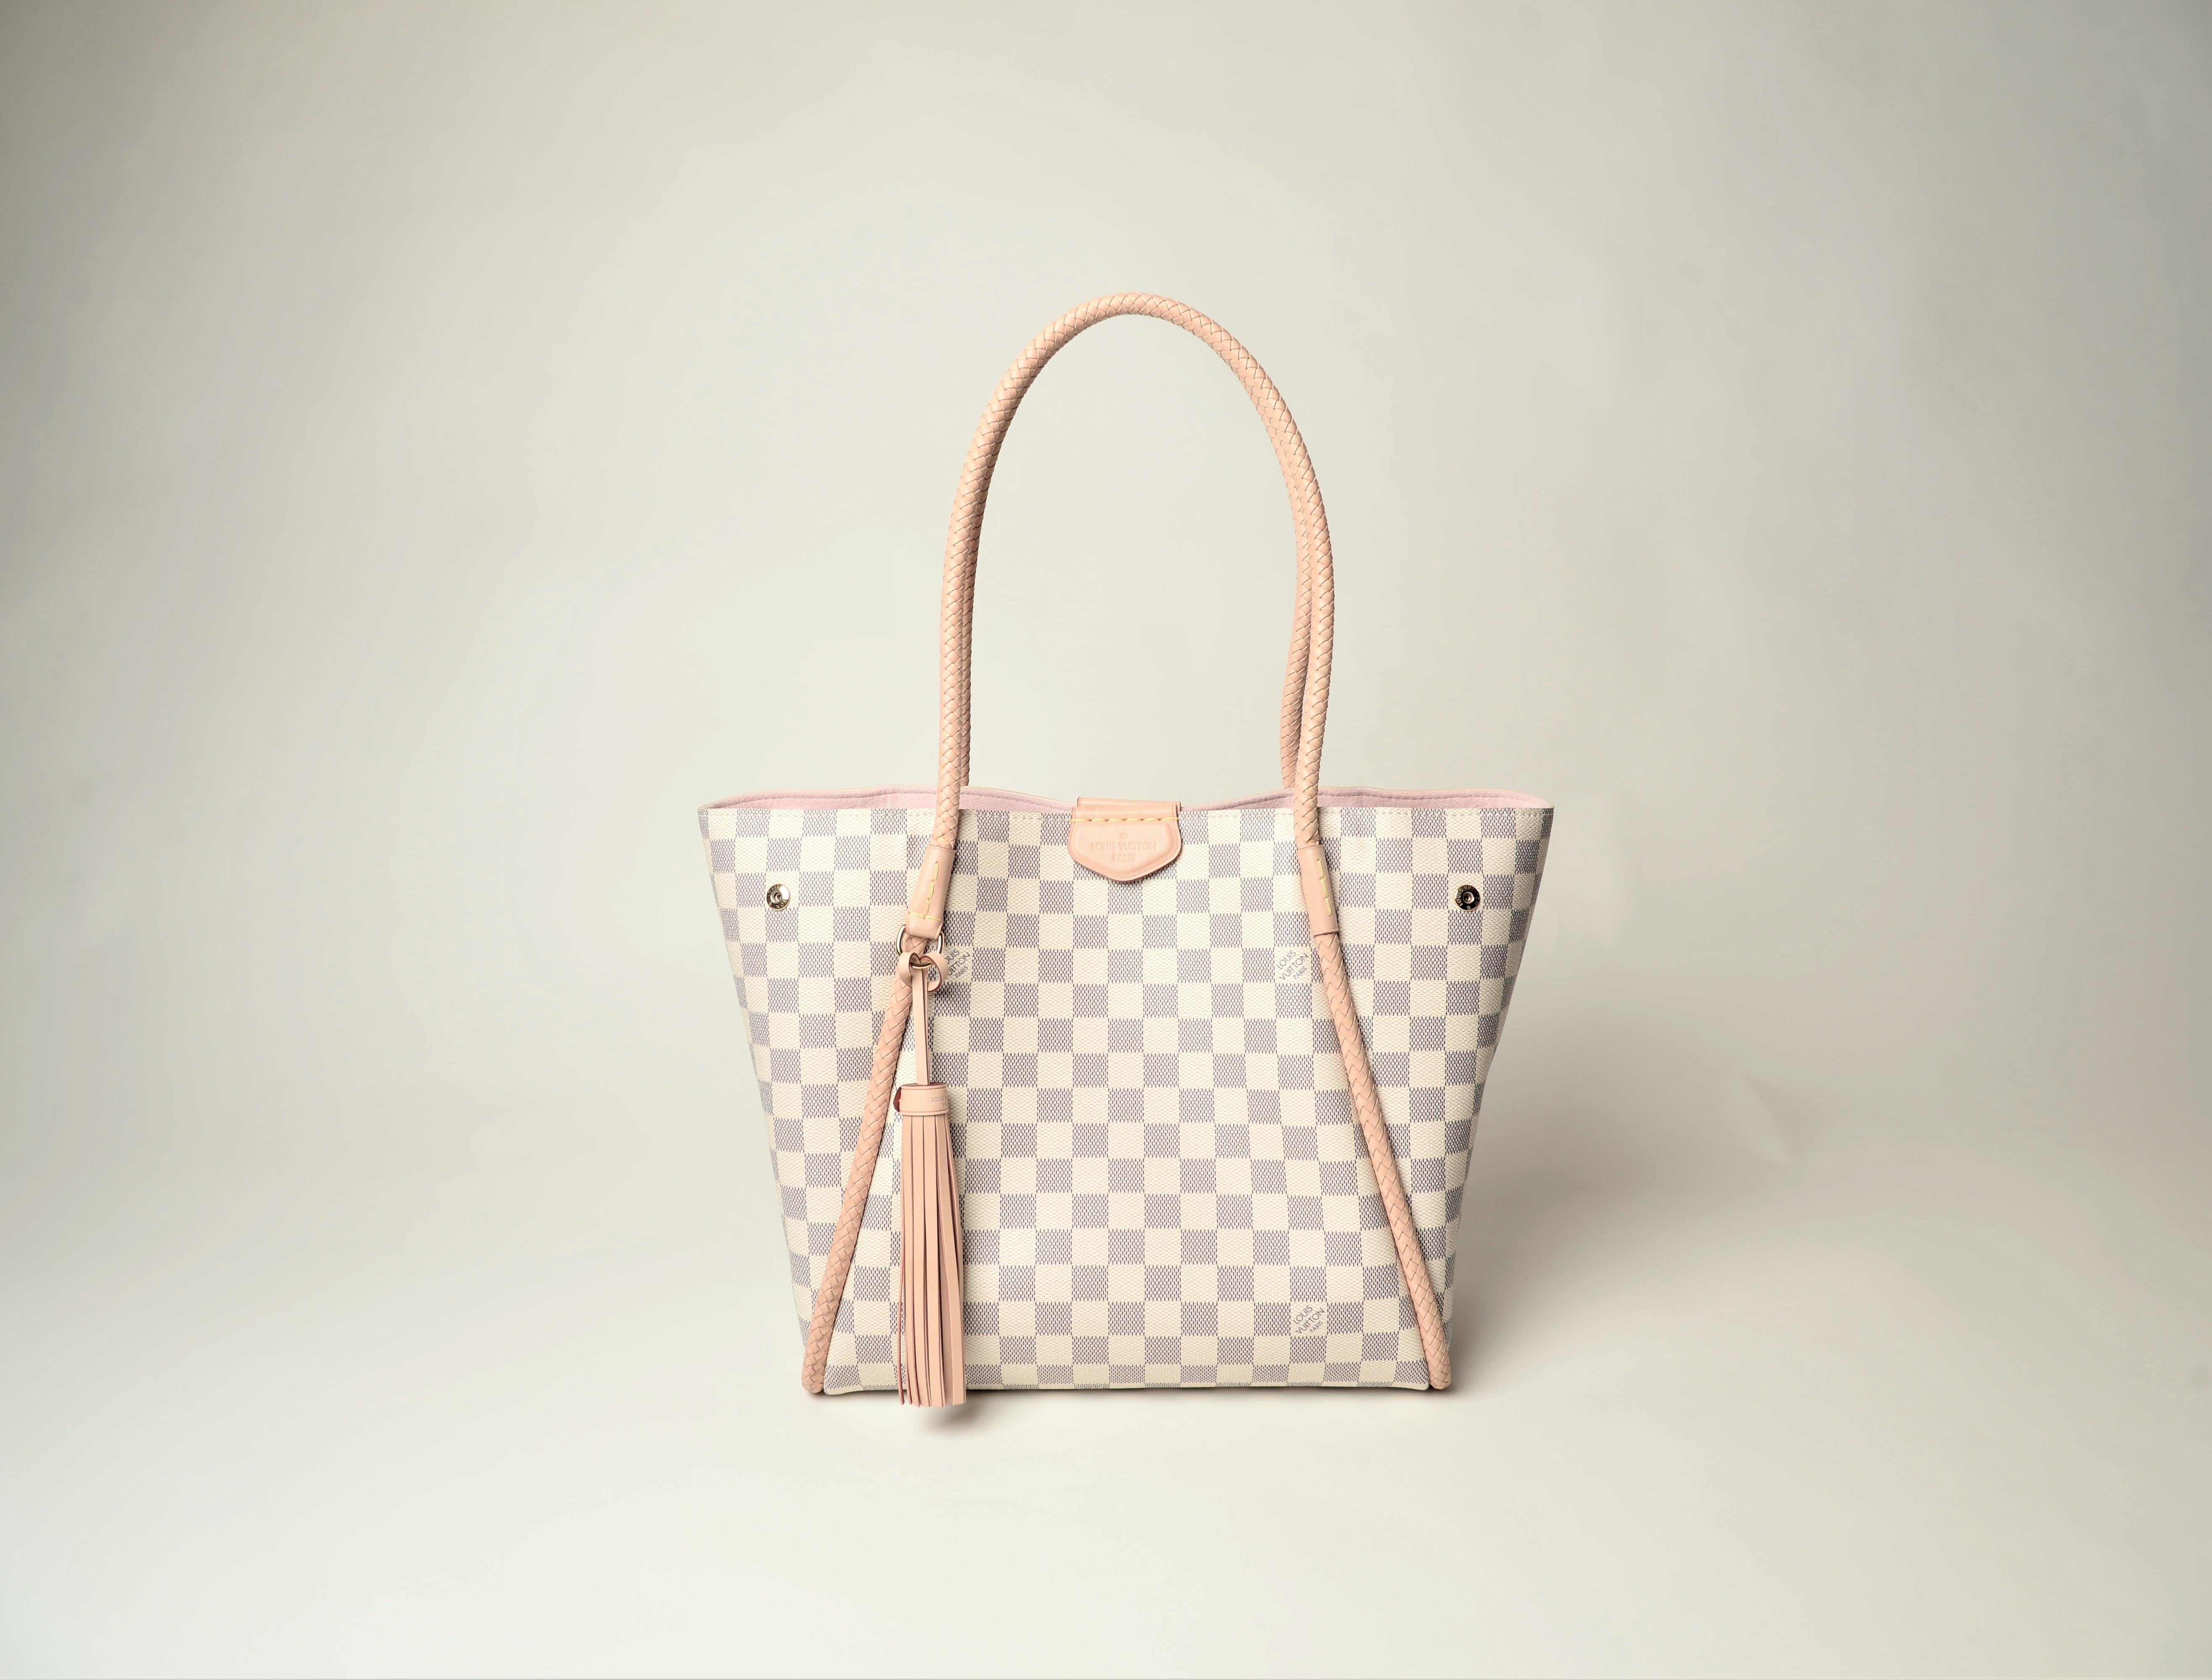 From the collection of SAVINETI we offer this Louis Vuitton Propriano Bag:
-	Brand: Louis Vuitton
-	Model: Propriano Damier Azur
-	Year: 2019
-	Code: TJ4169
-	Condition: Good (small signs of wear at 2 corners, overall very nice condition; inside is